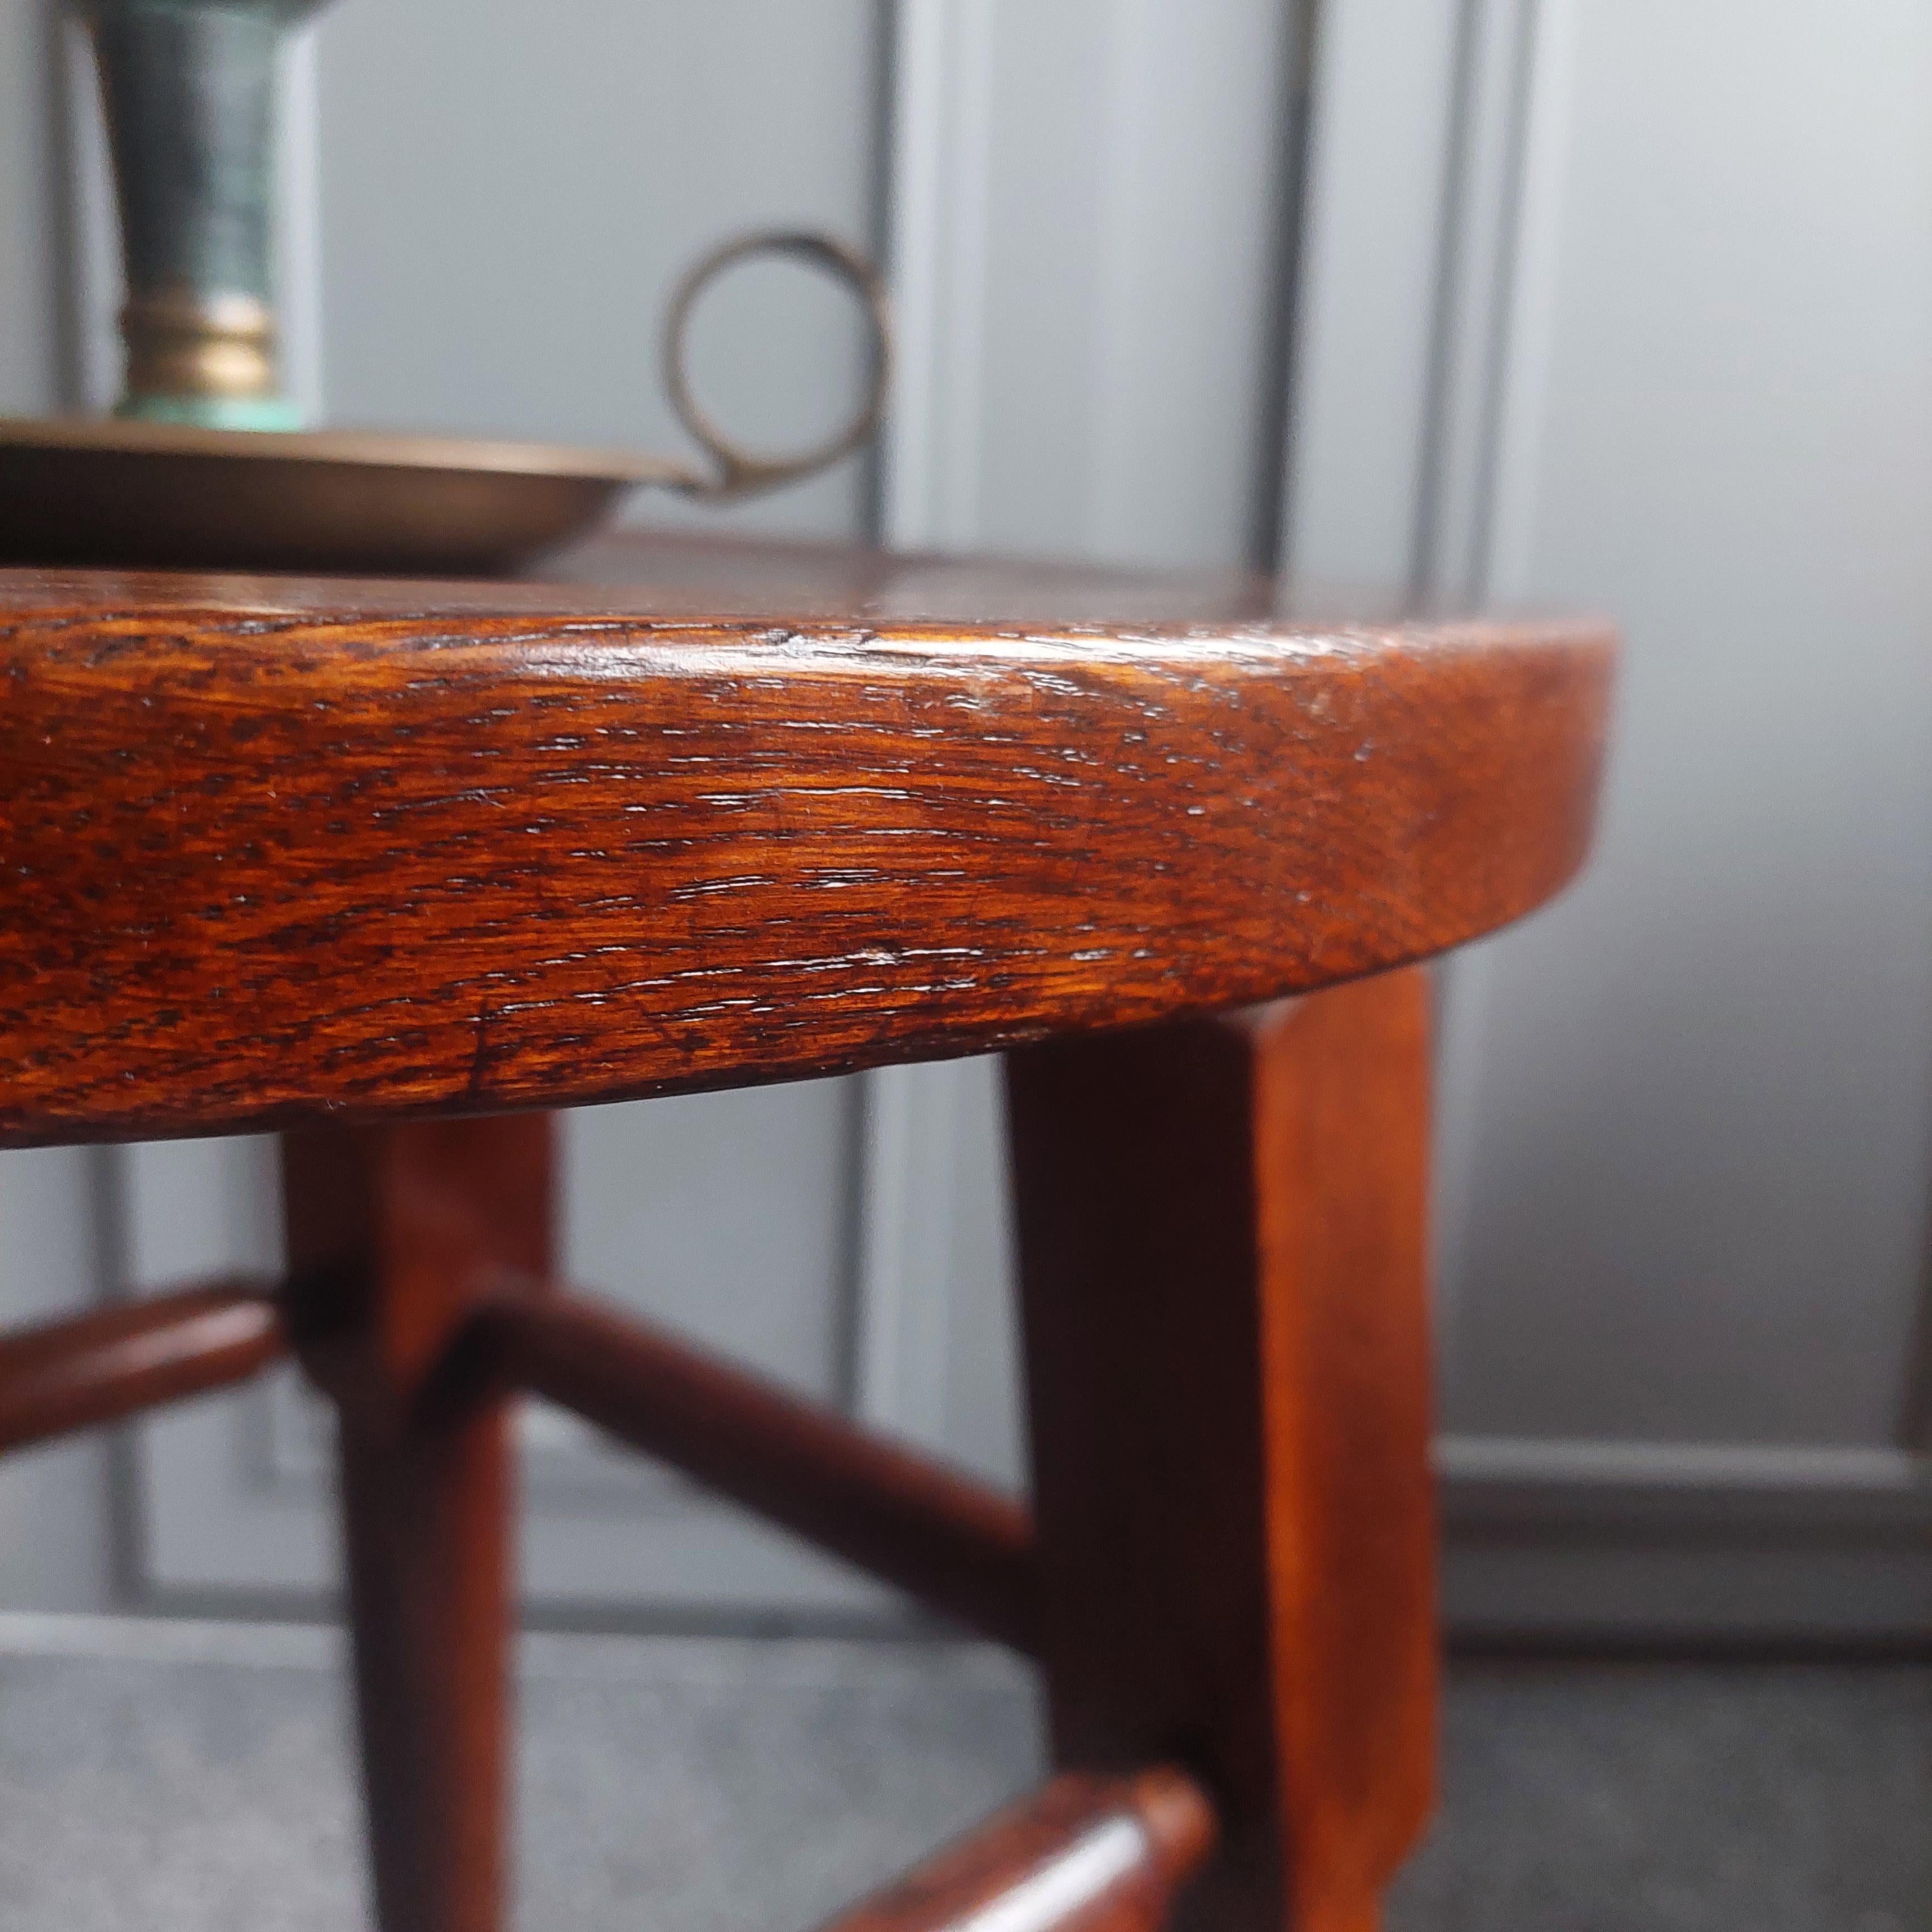 20th Century Arts and Crafts Oak Stool Side table by Gaskell & Chambers, 30s For Sale